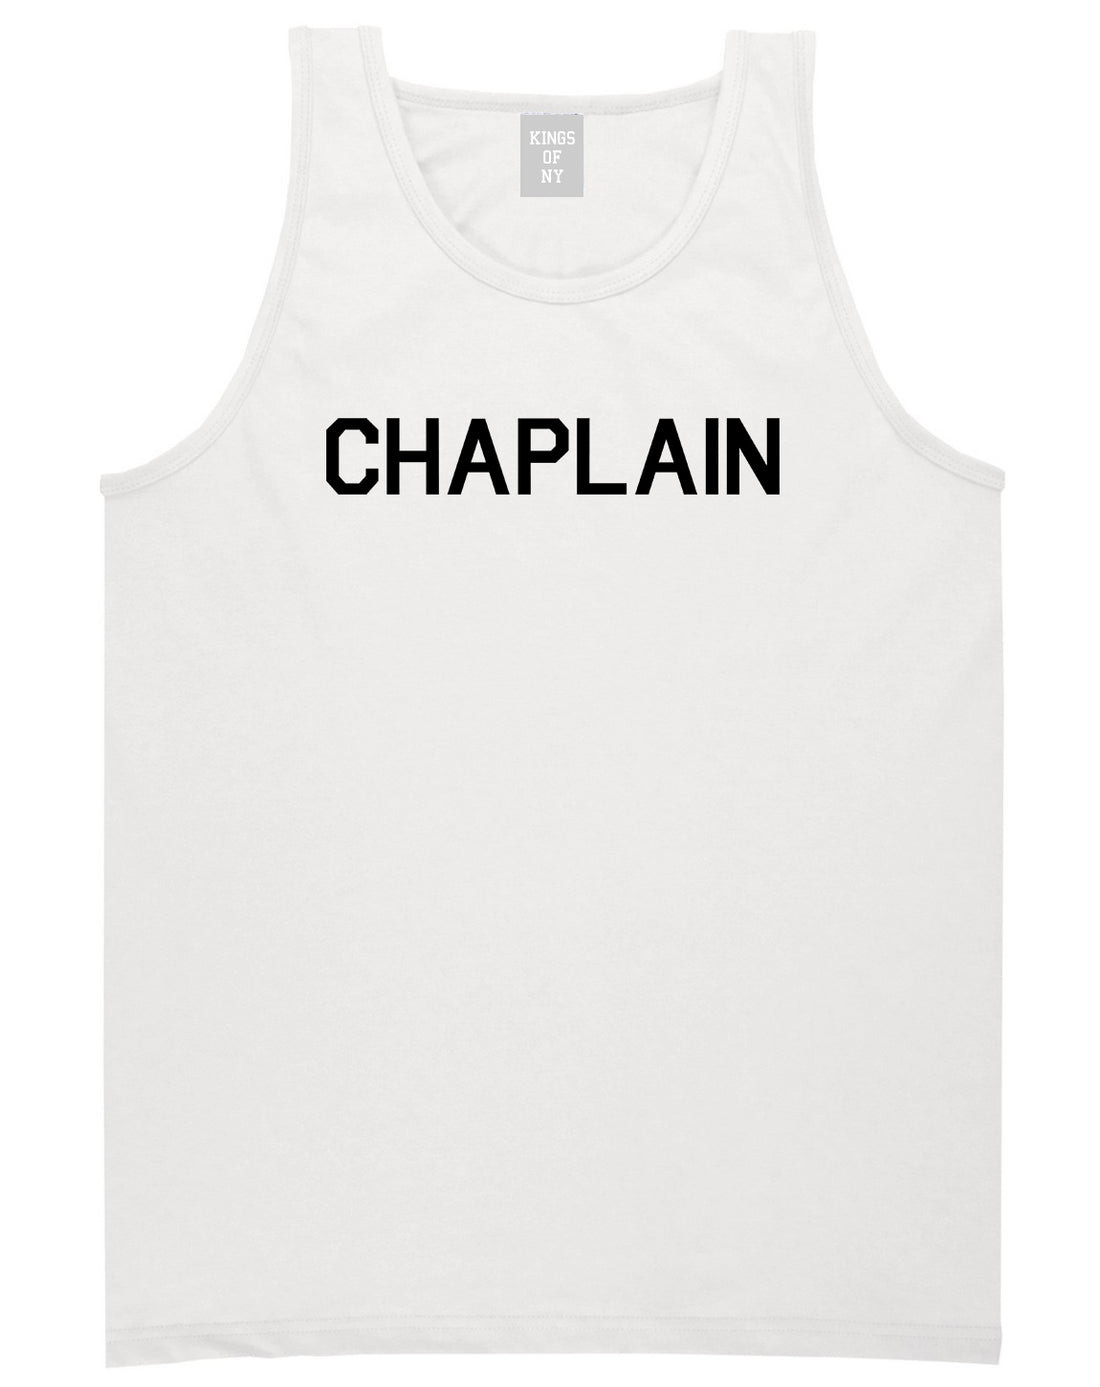 Christian Chaplain White Tank Top Shirt by Kings Of NY